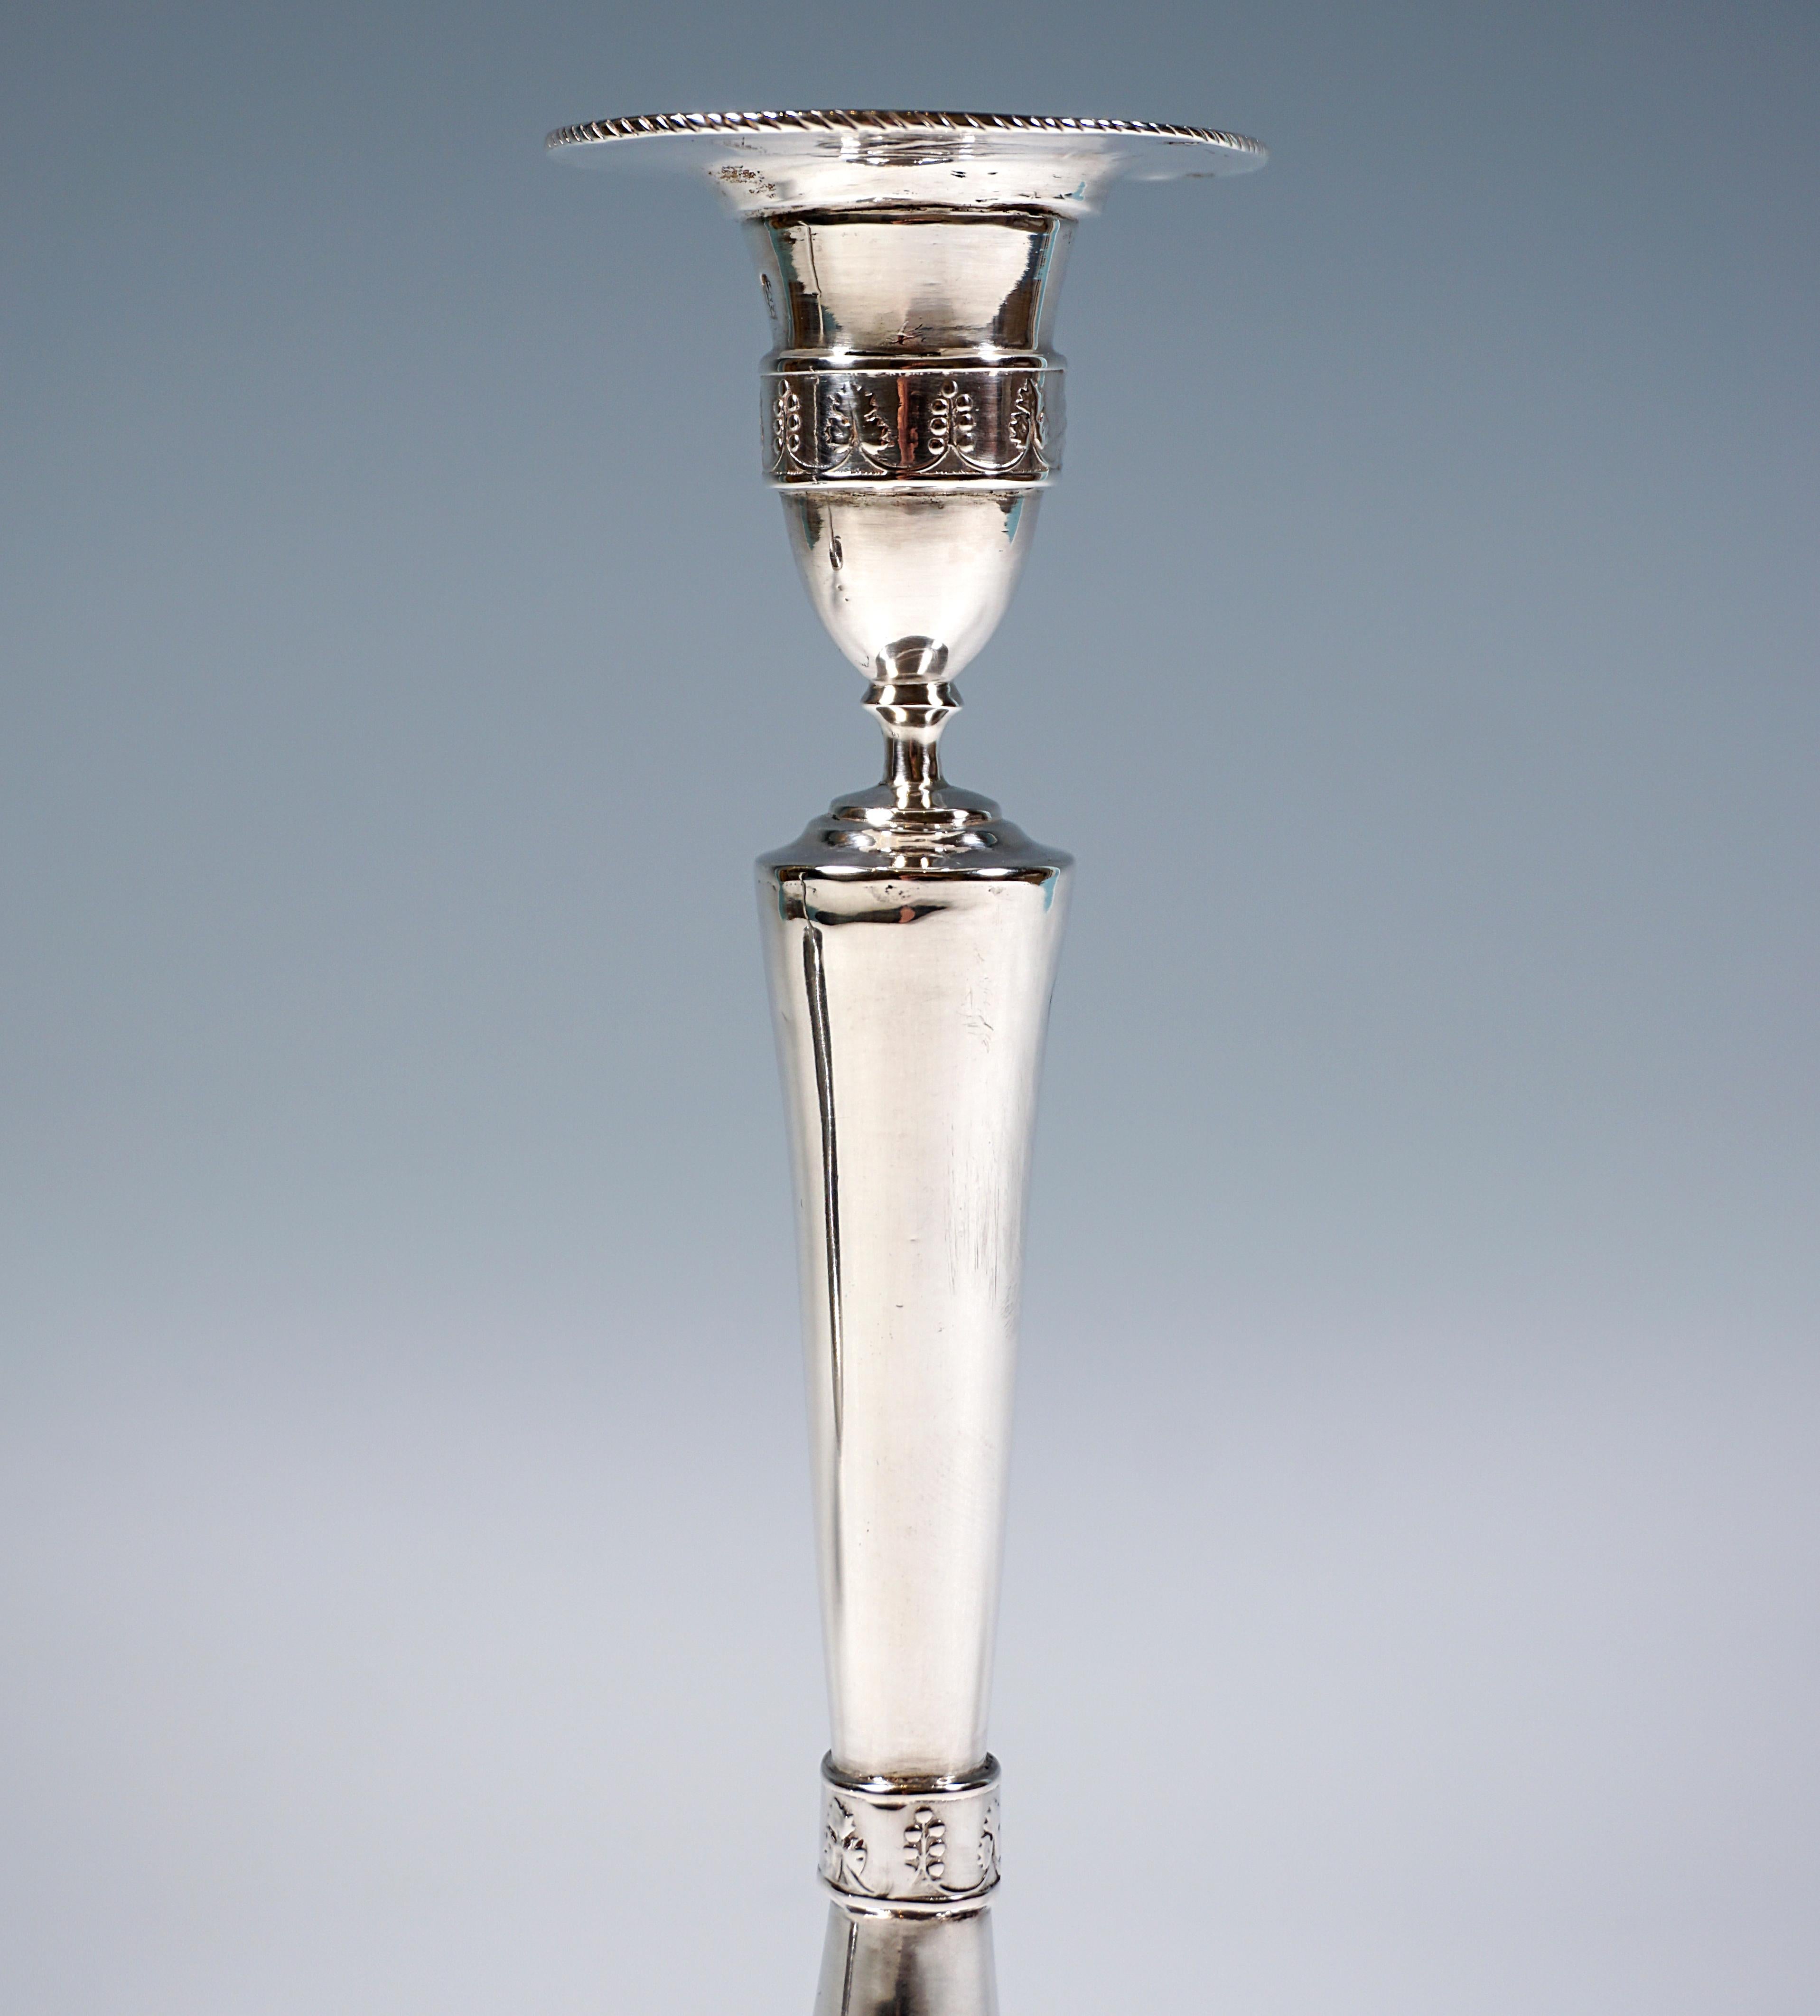 Hand-Crafted Pair Of Antique Empire Silver Candle Holders, Johann Kaba Vienna, Dated 1803 For Sale